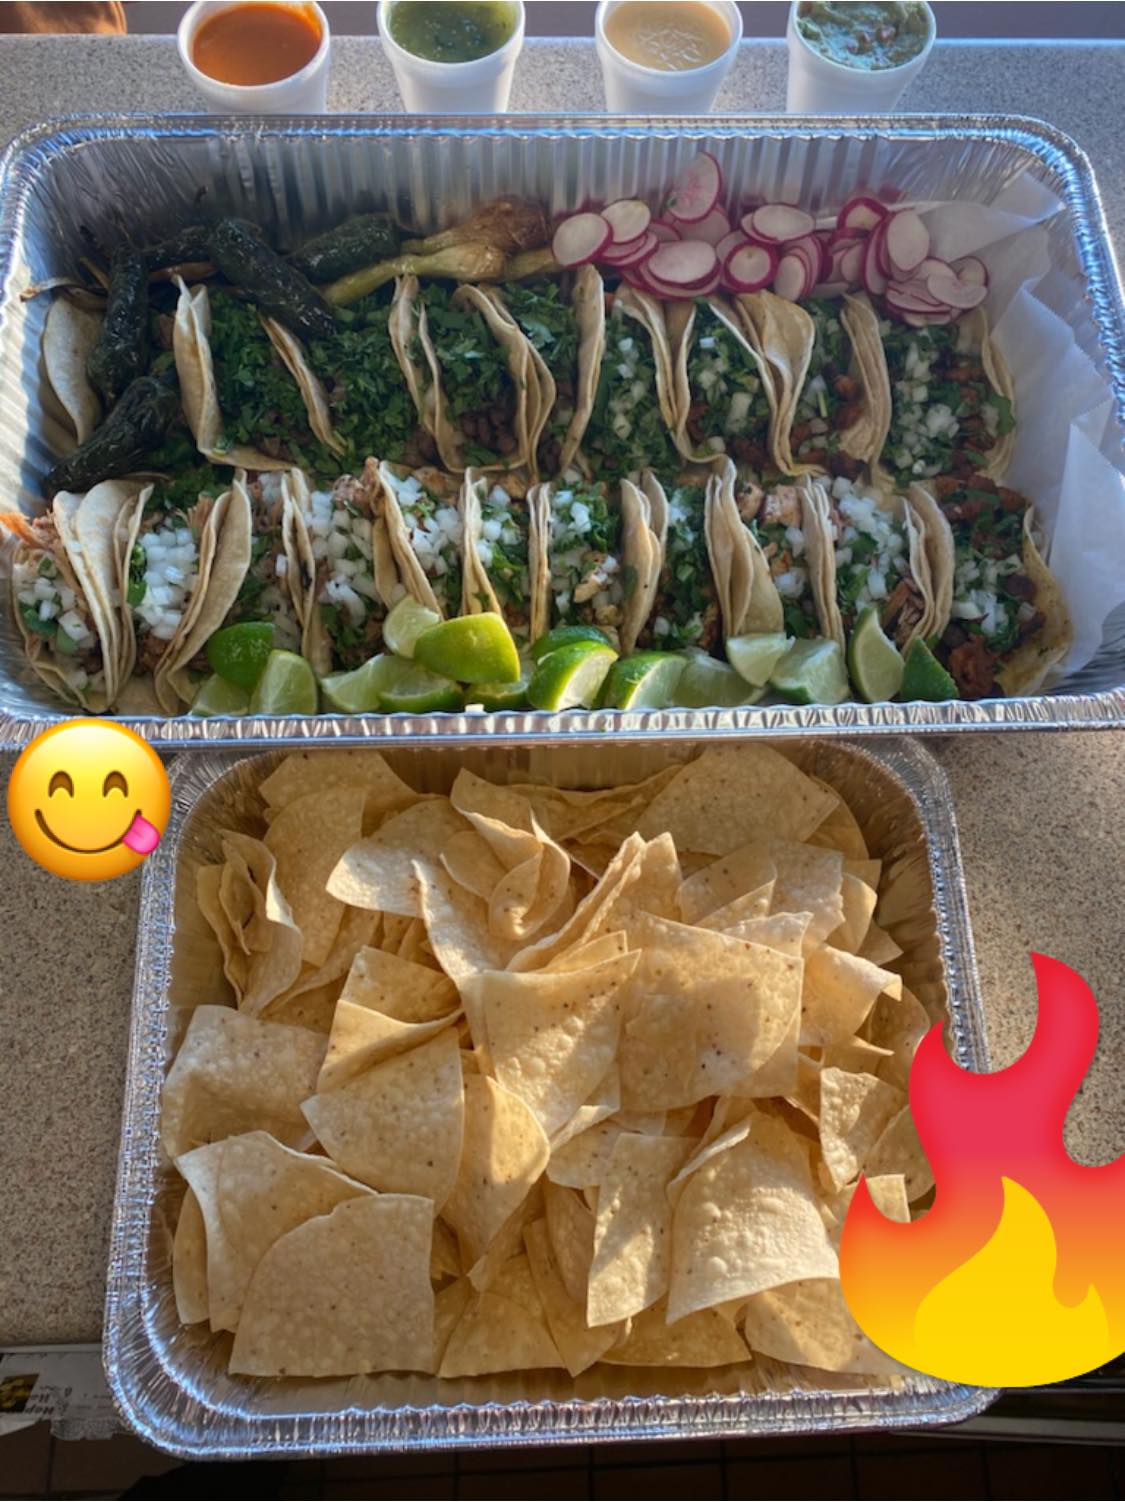 Catering tray full of tacos